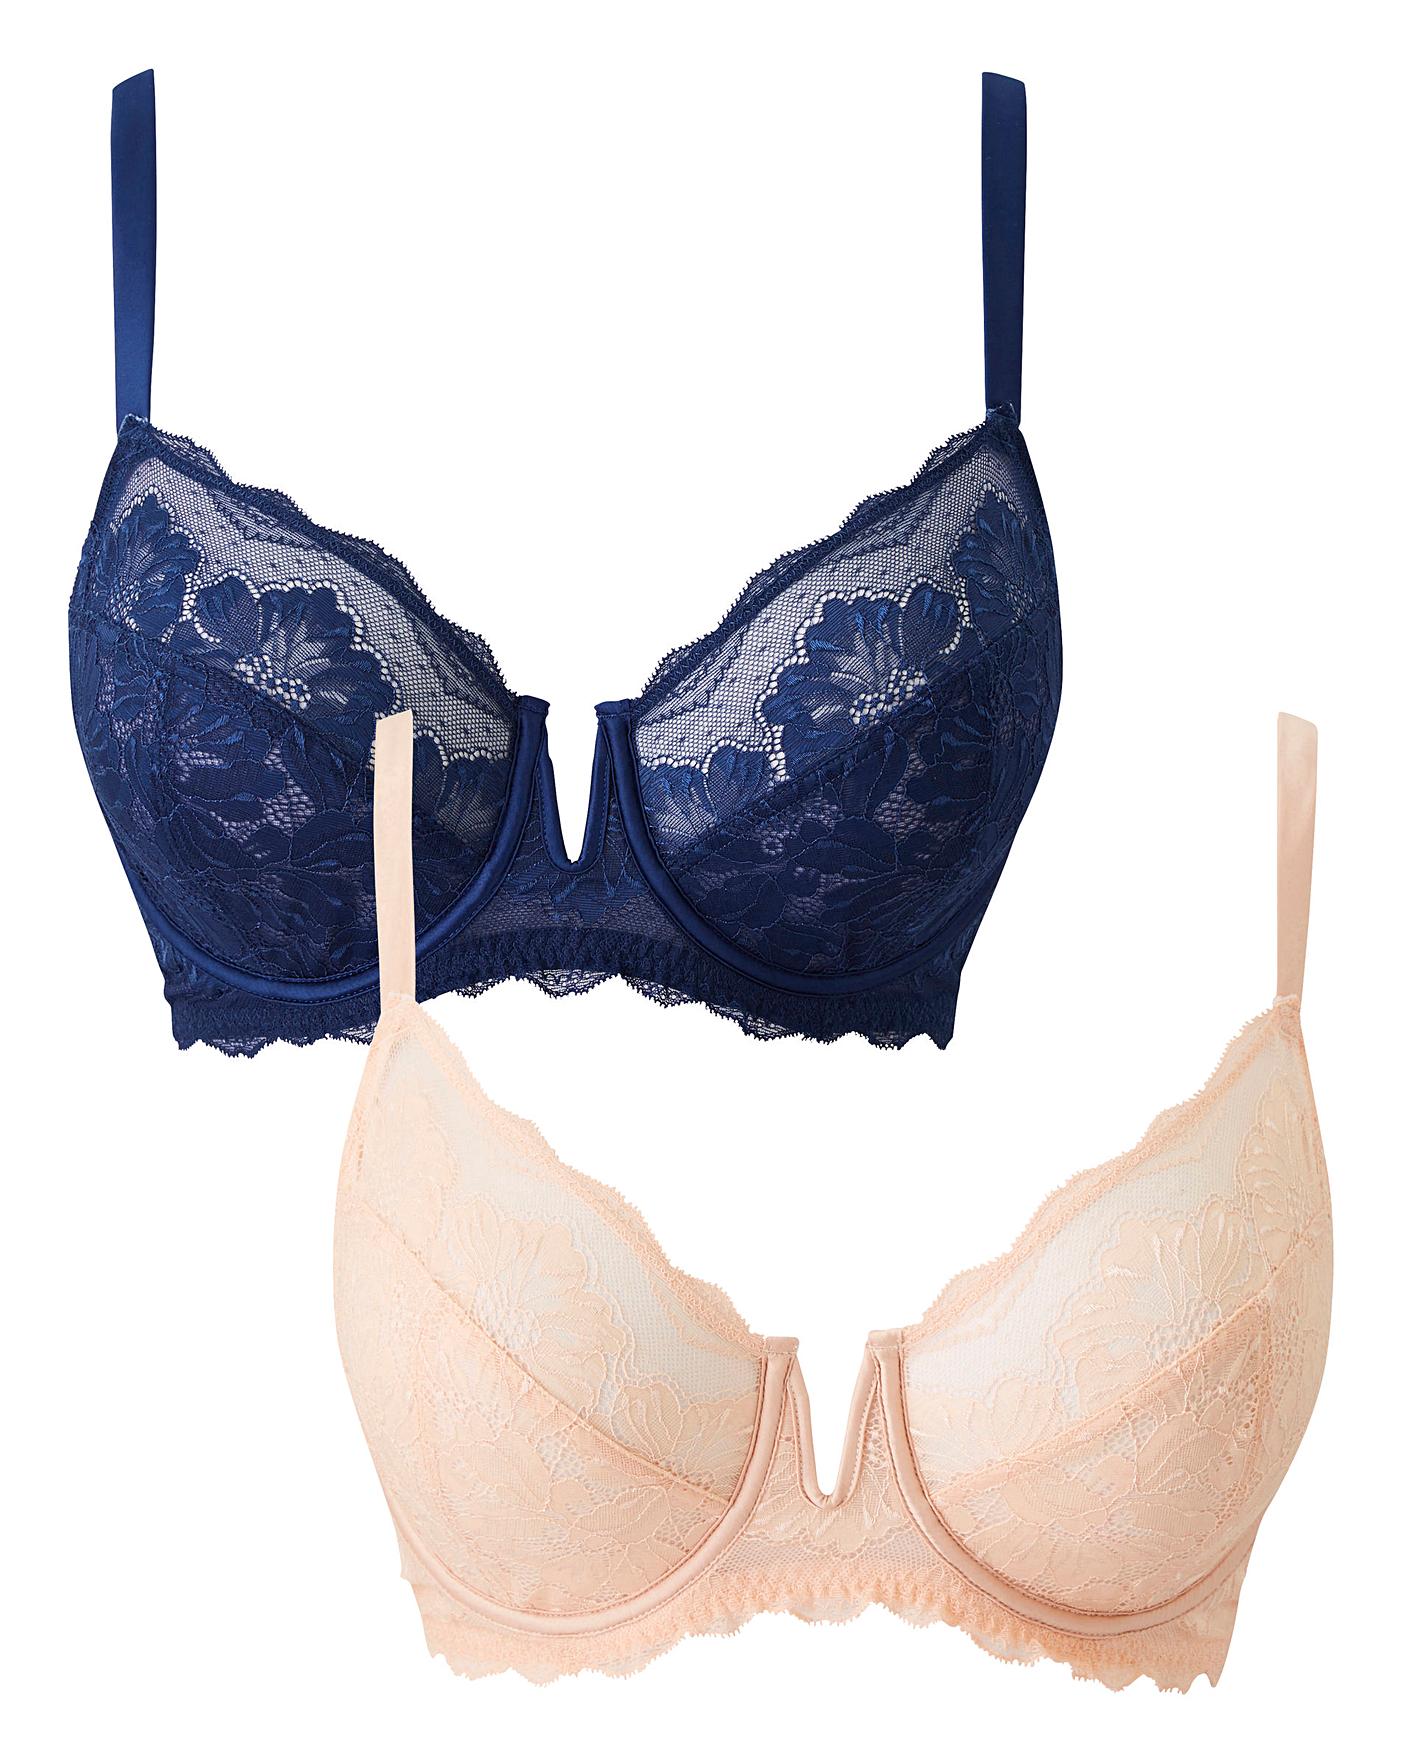 2PK Katie Blush/Navy Lace Full Cup Bras | Simply Be